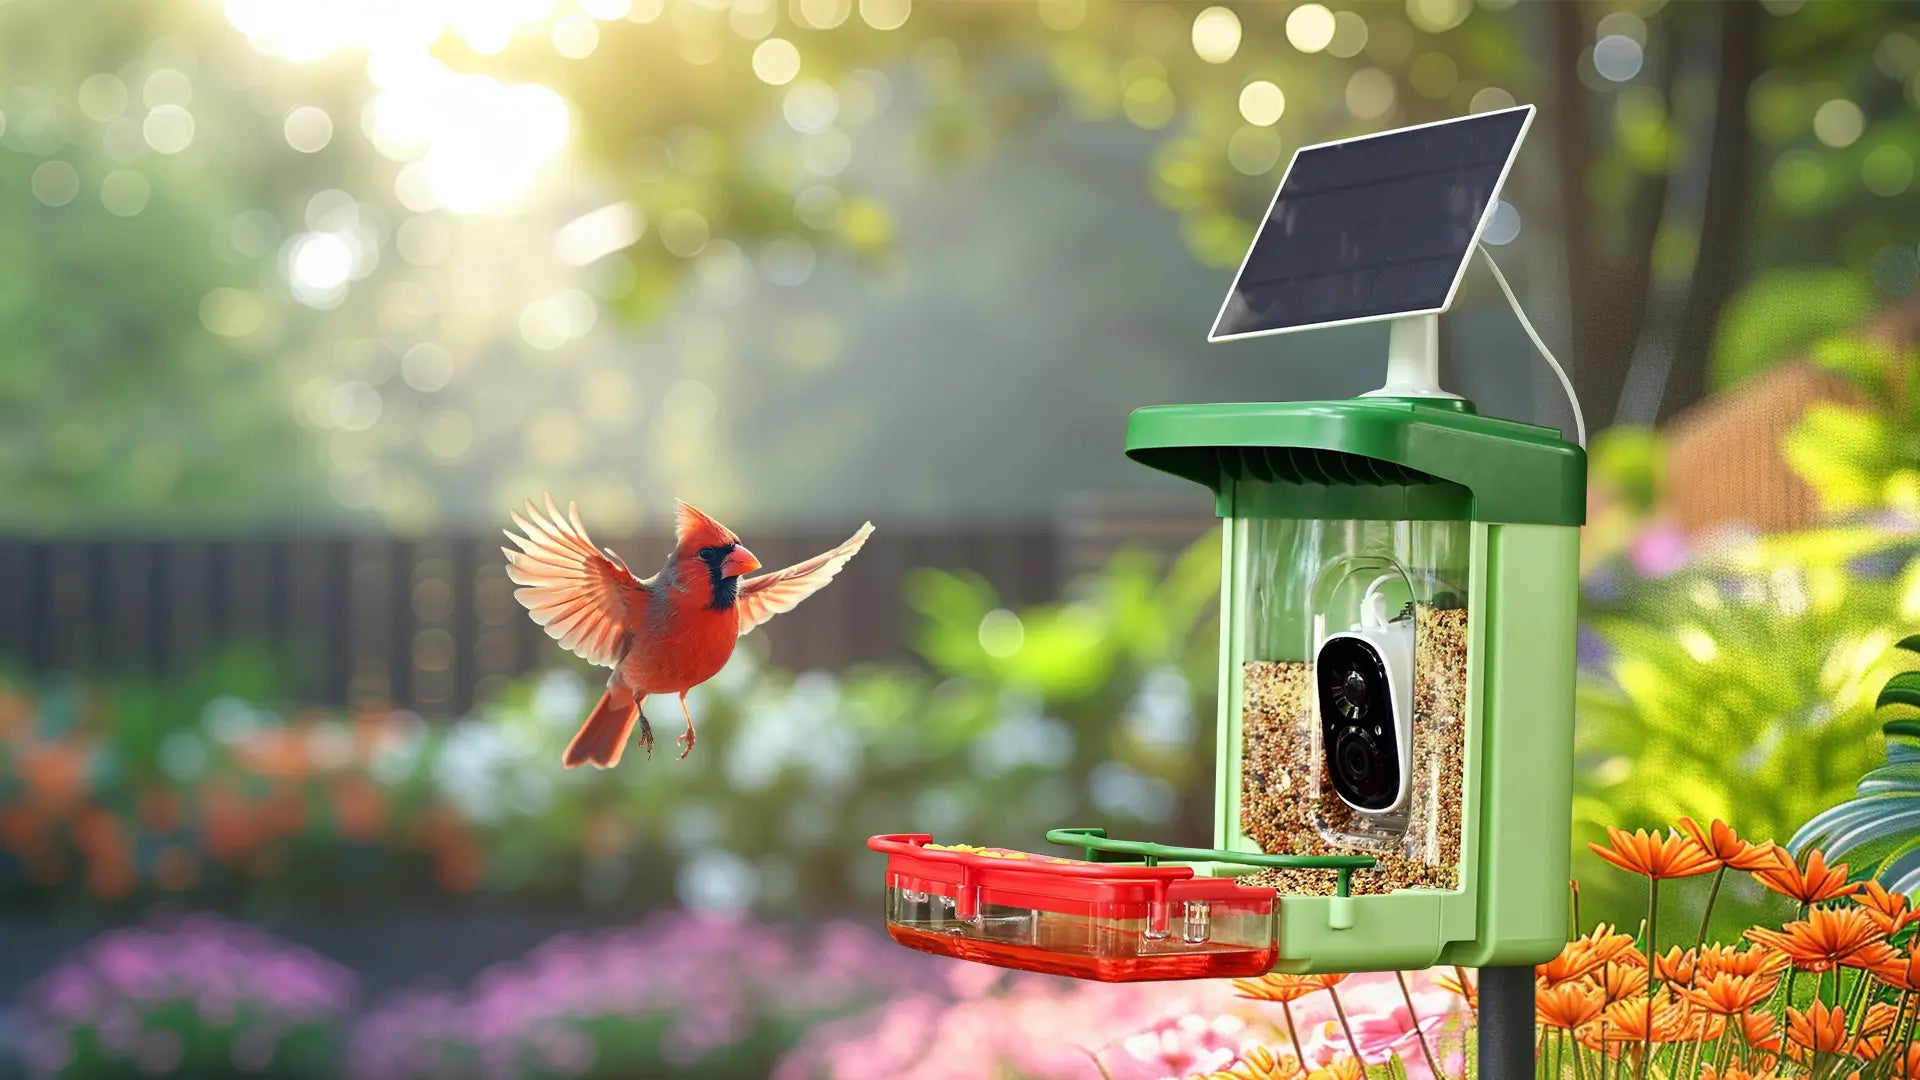 A cardinal bird flies in front of bird feeder camera, wanting to come and eat